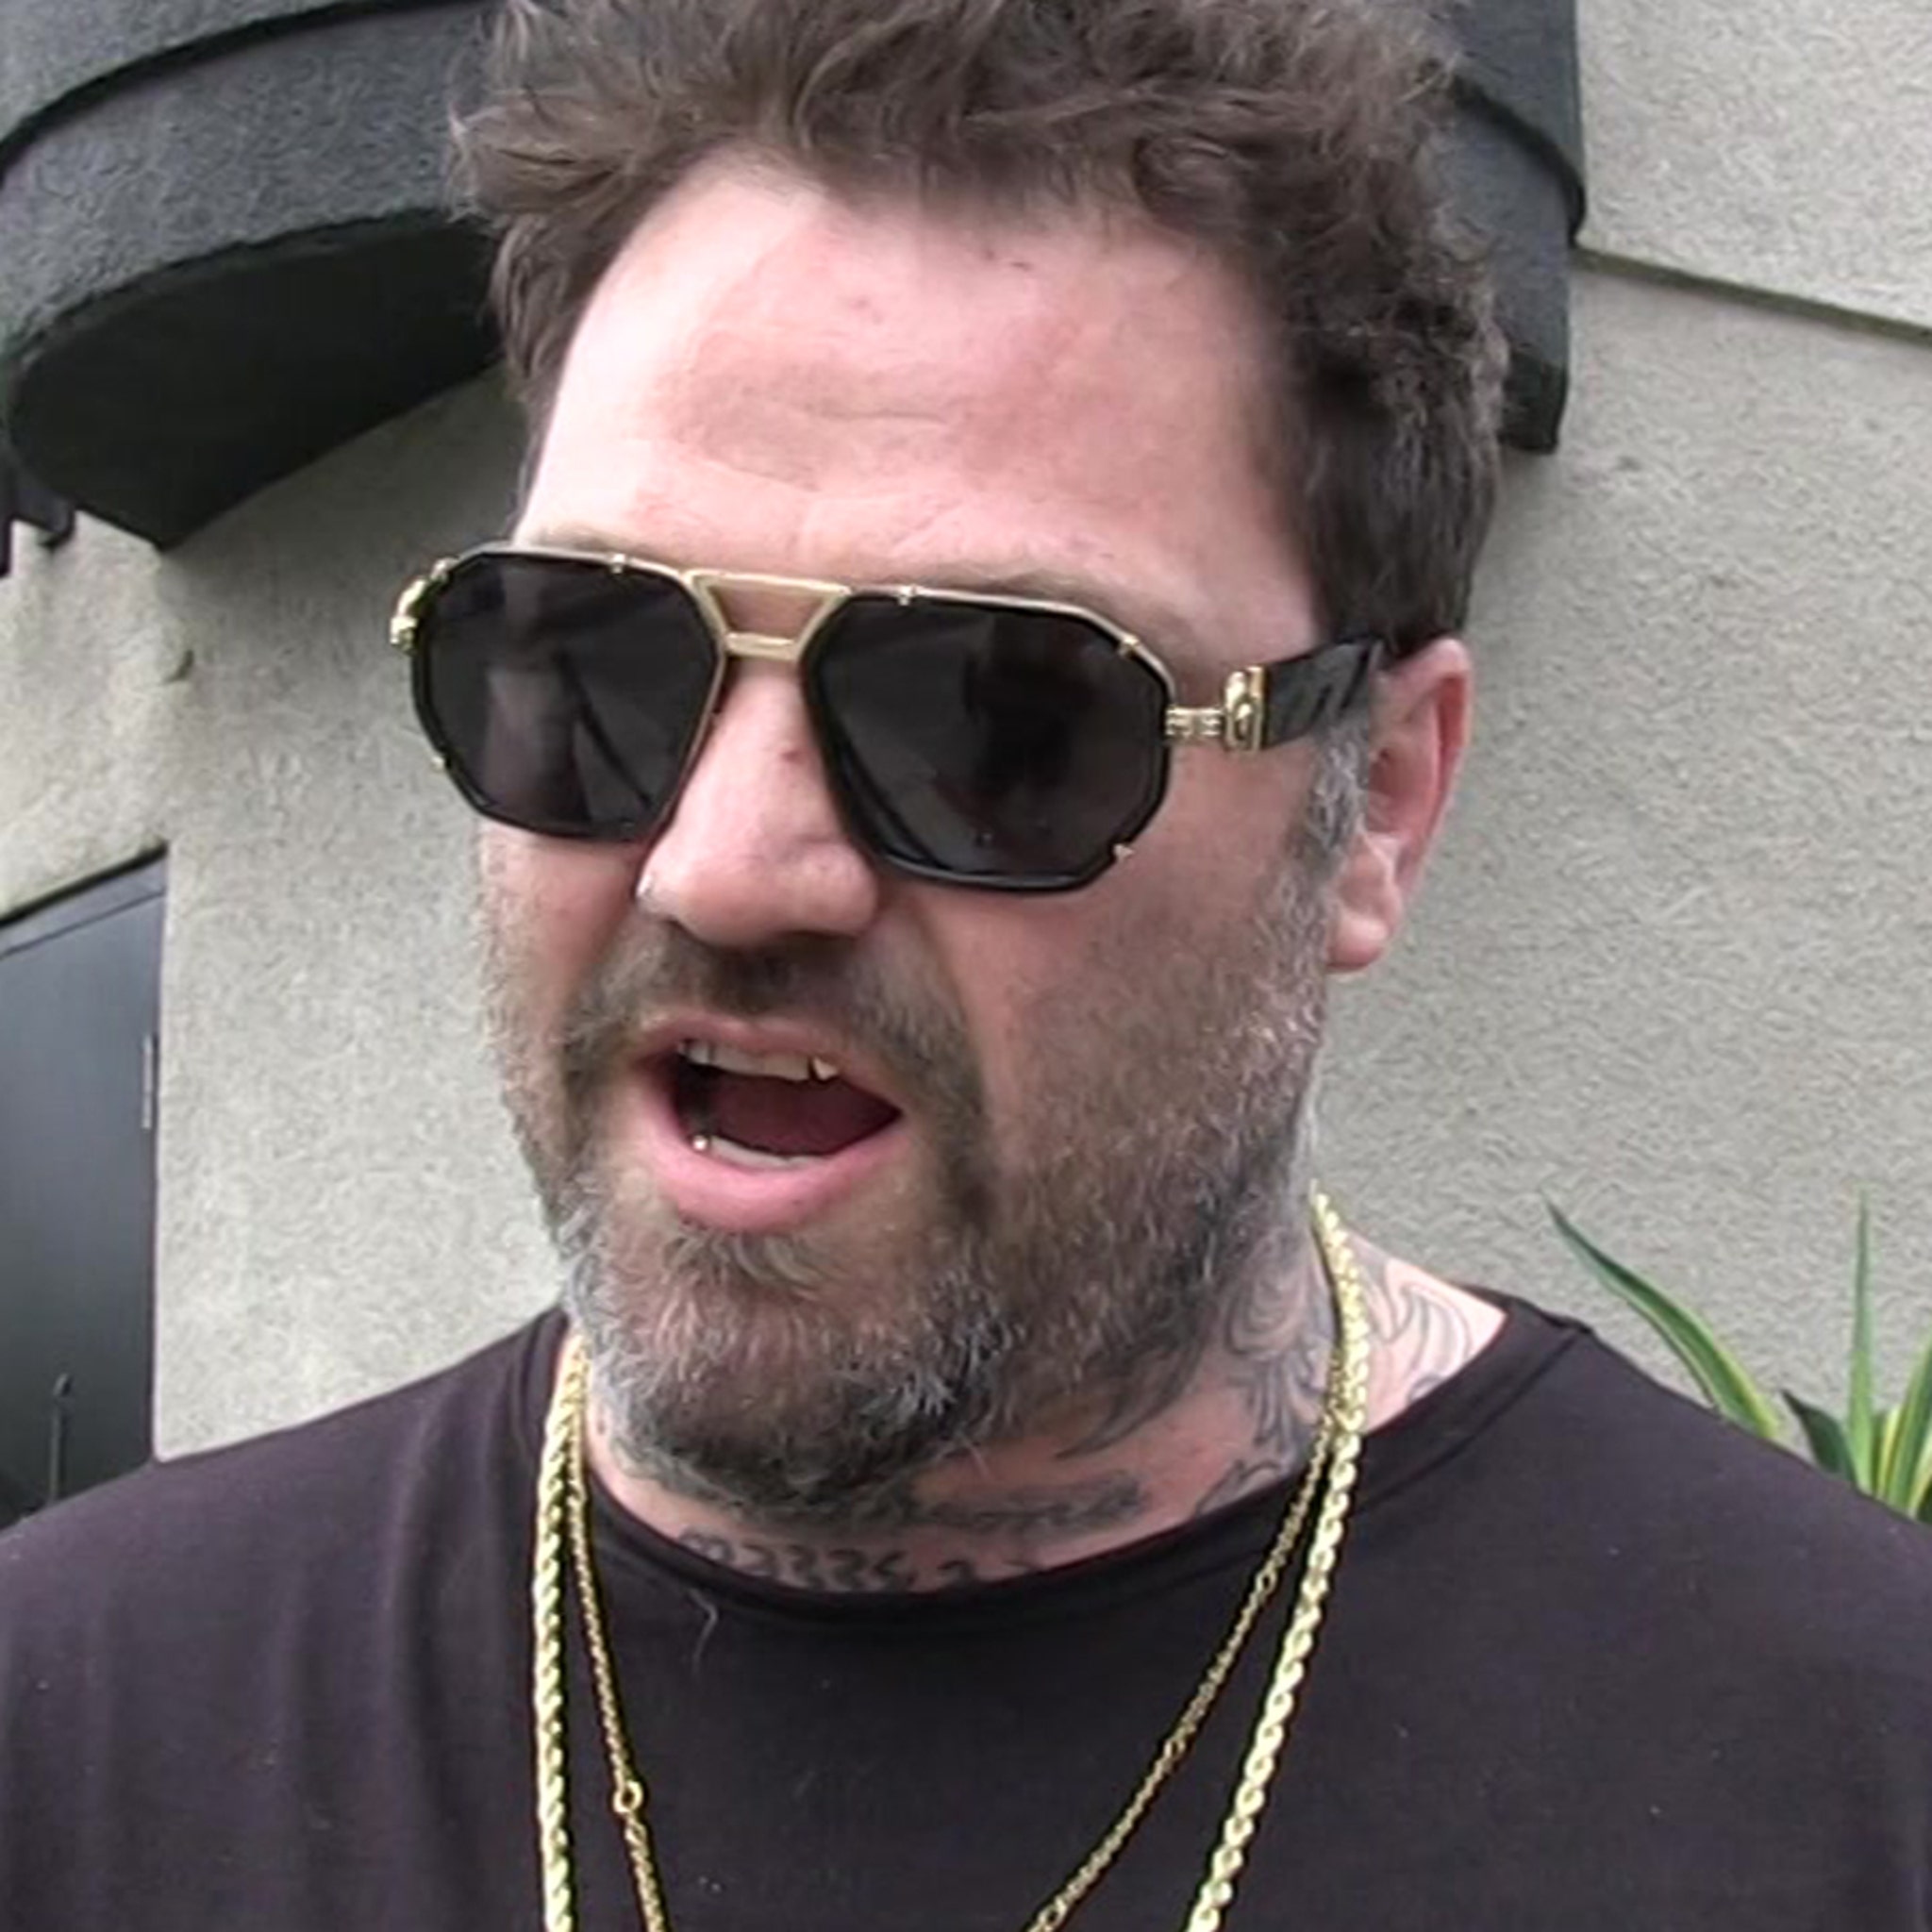 Jackass Star Bam Margera Arrested for Public Intoxication